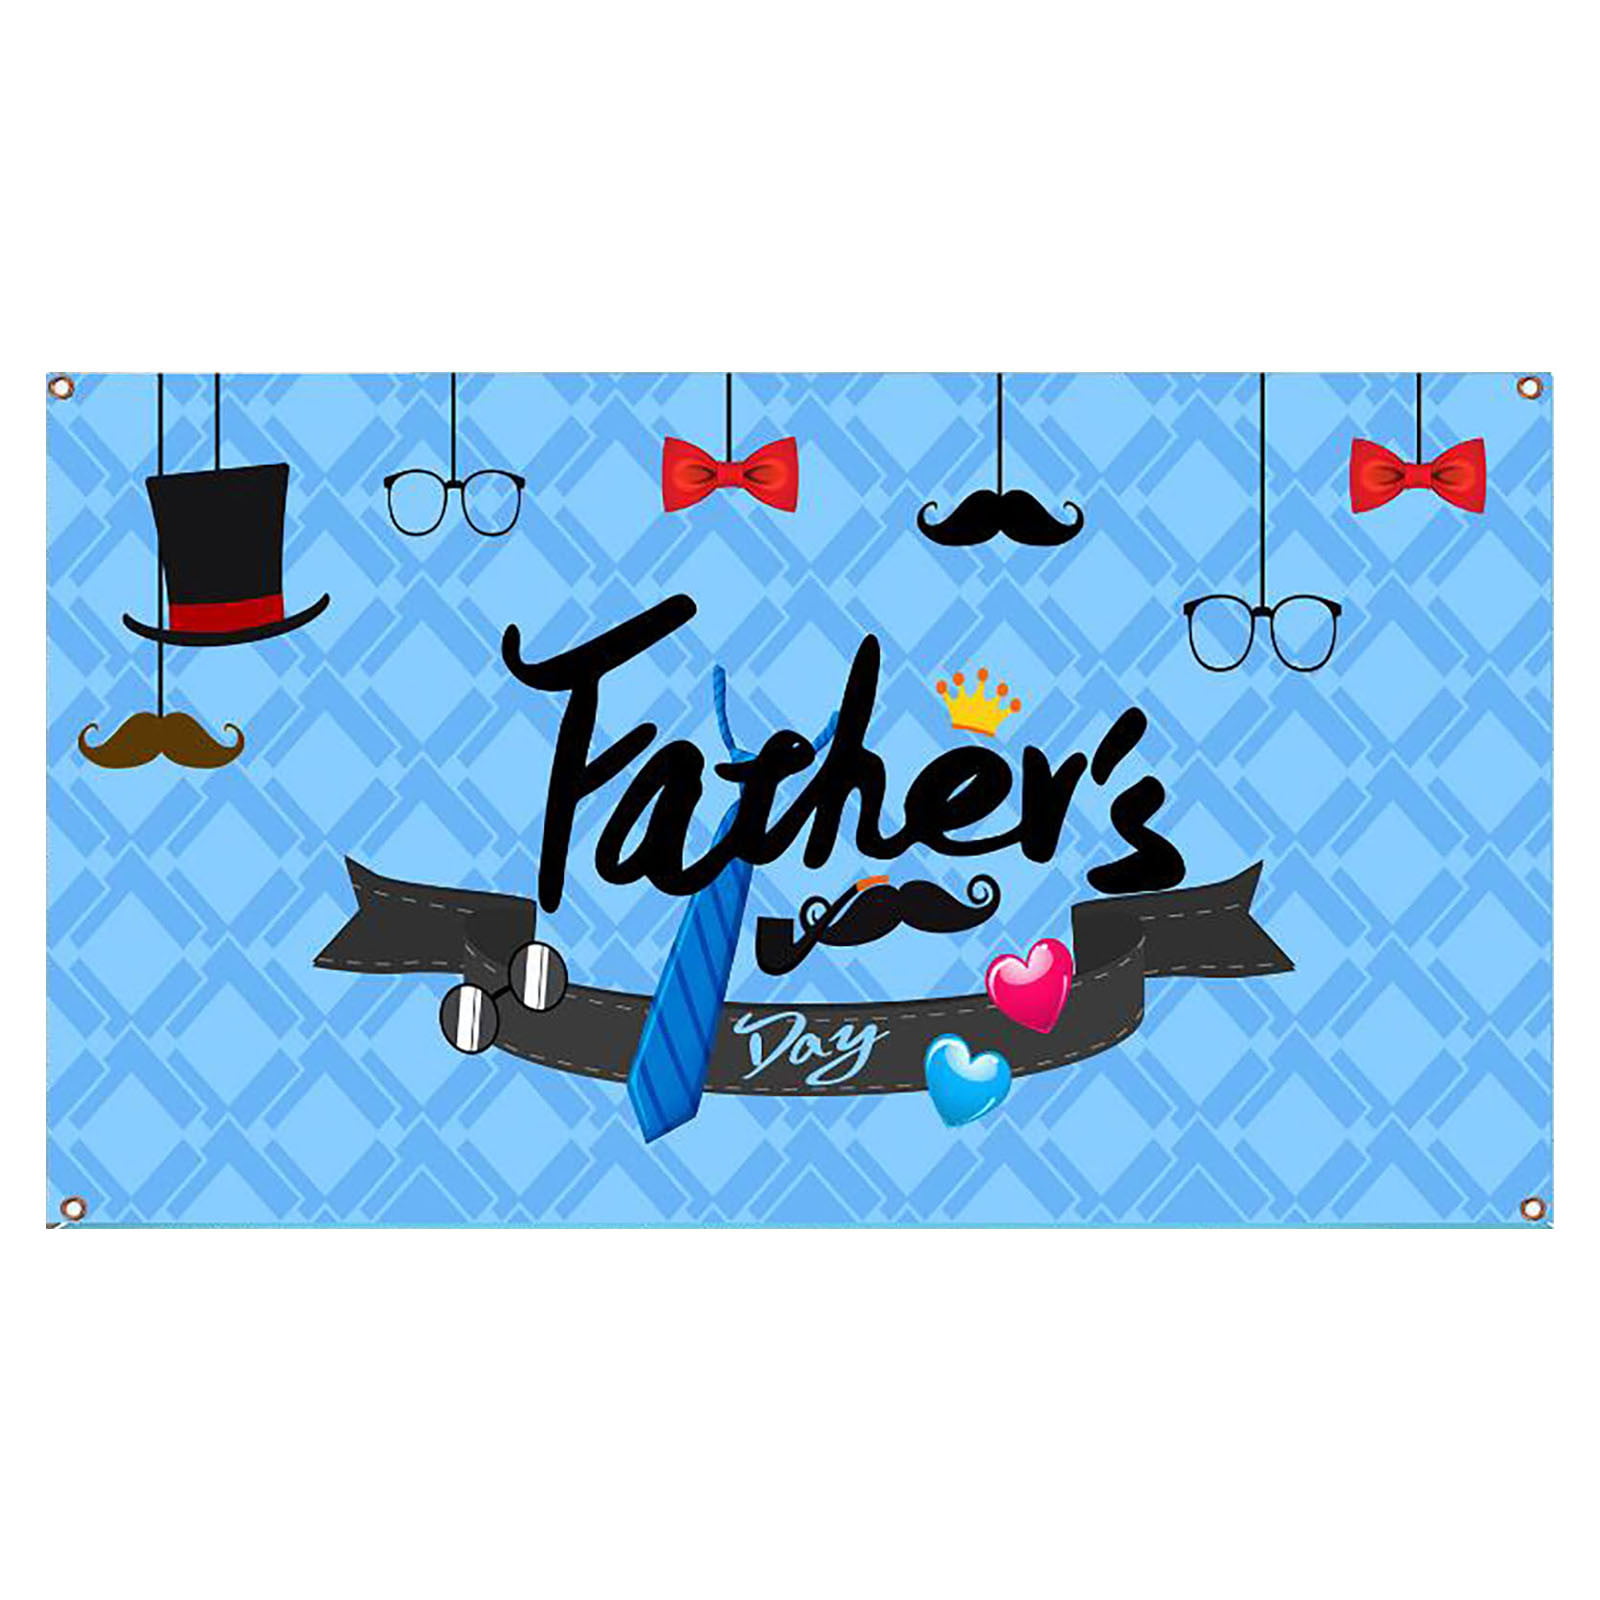 Dudaacvt 7x5ft Happy Fathers Day Backdrop Blue Background Tie Photography Studio Props Party Decoration D433